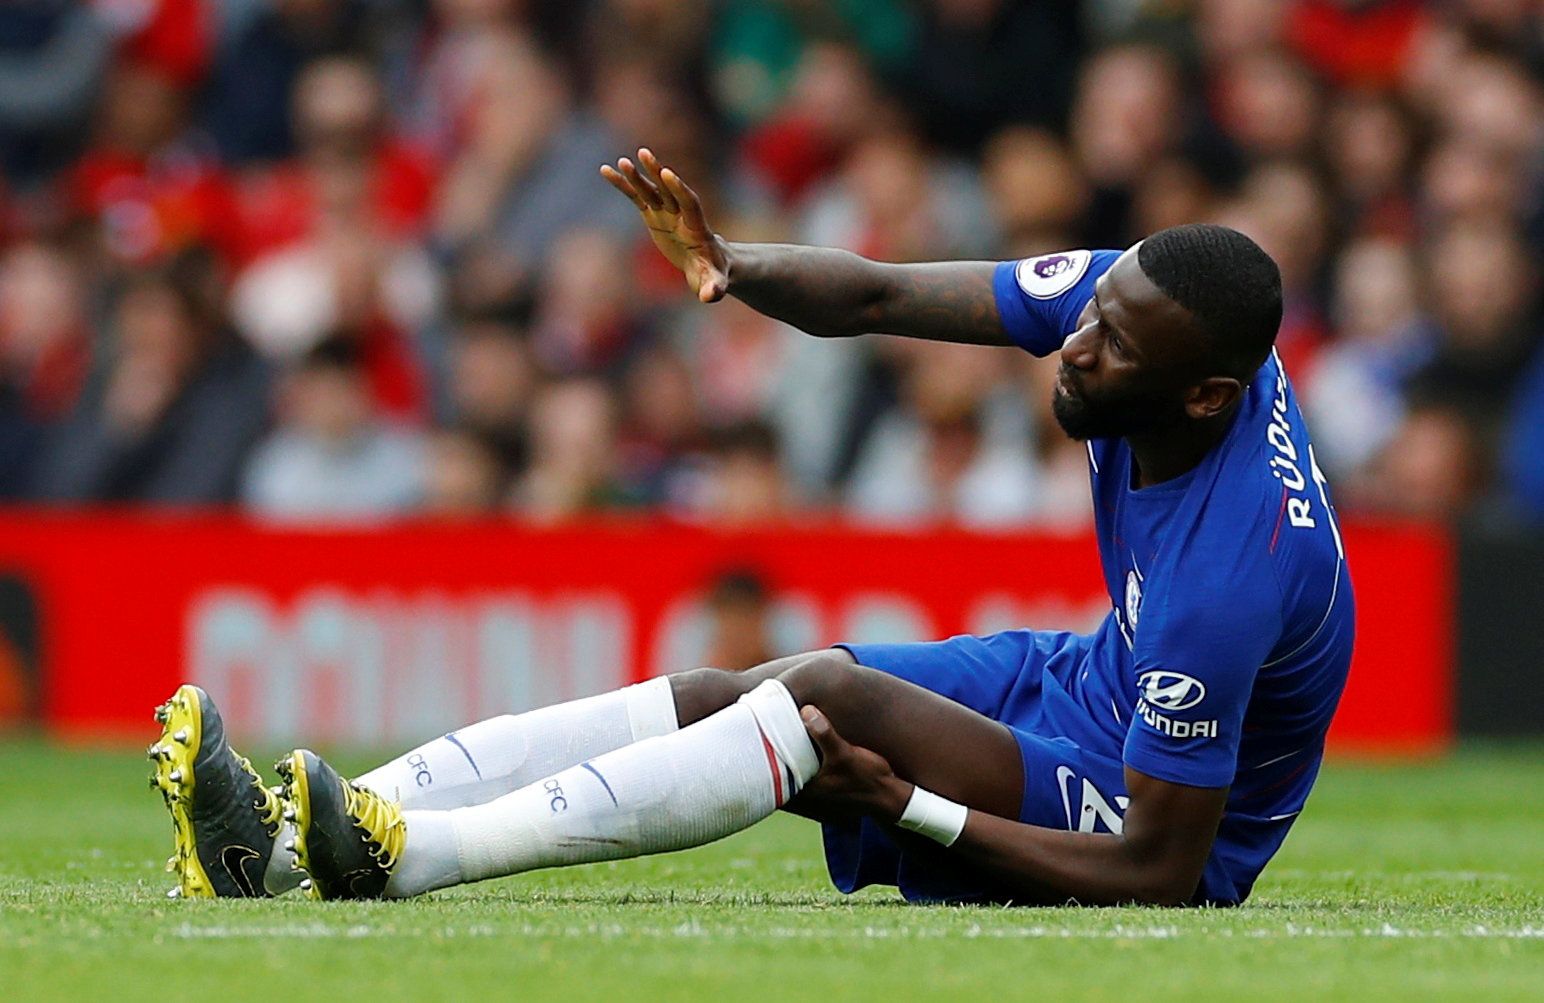 Soccer Football - Premier League - Manchester United v Chelsea - Old Trafford, Manchester, Britain - April 28, 2019  Chelsea's Antonio Rudiger down injured being being substituted      REUTERS/Phil Noble  EDITORIAL USE ONLY. No use with unauthorized audio, video, data, fixture lists, club/league logos or 